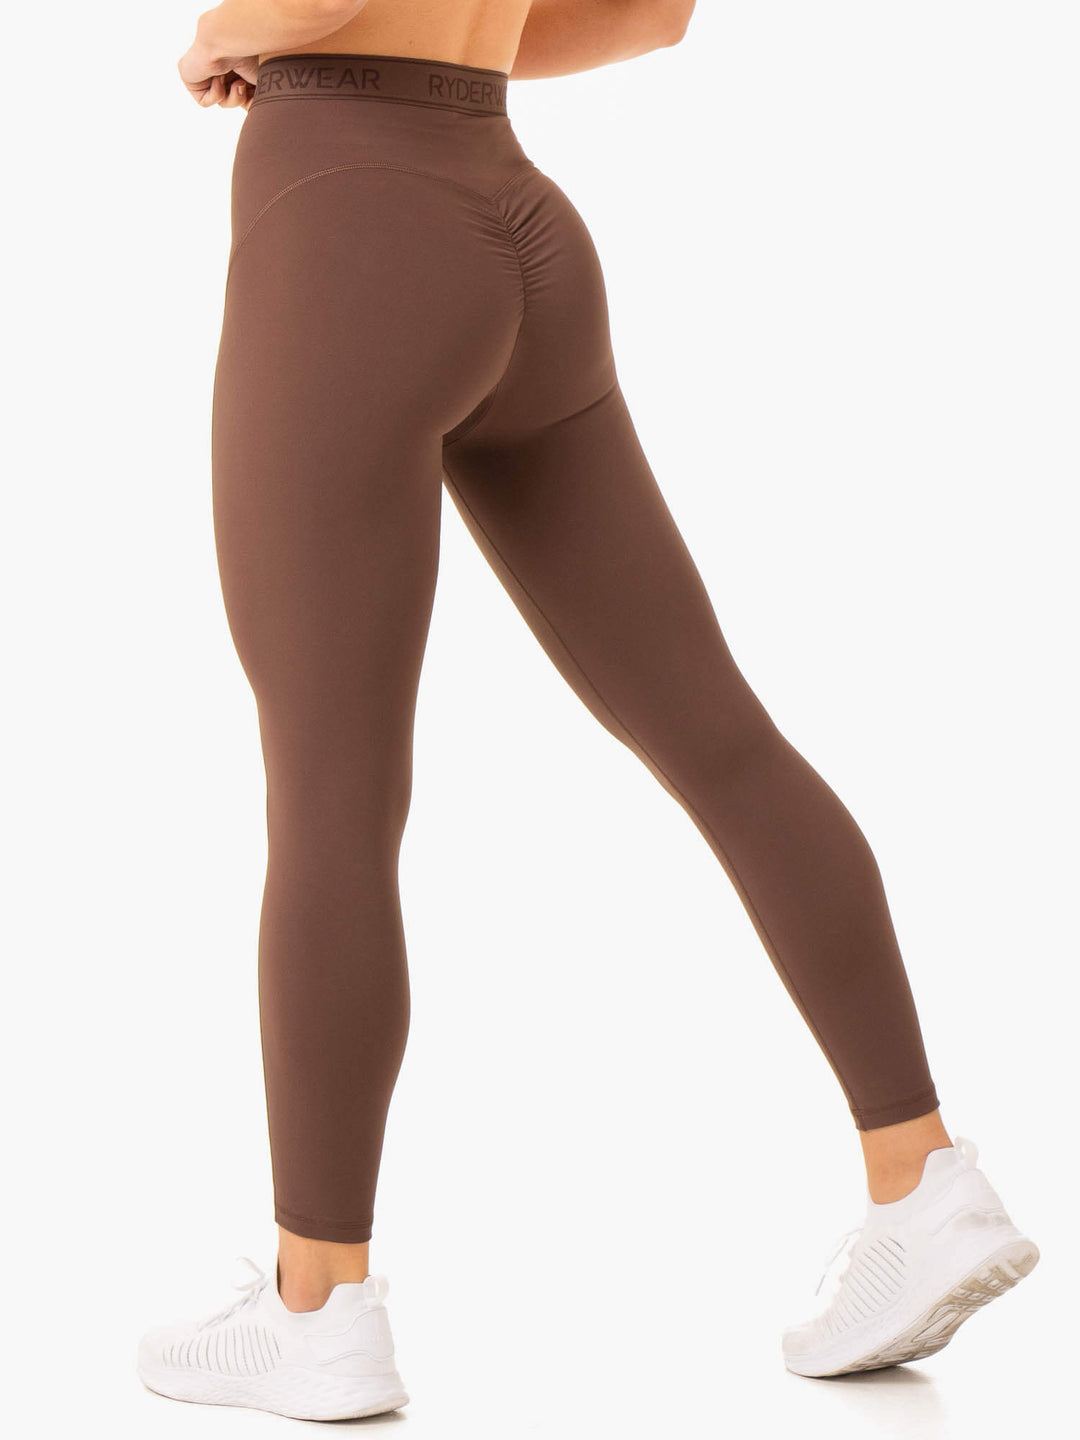 Chocolate Opaque Tights - S/M, M/L + CURVE